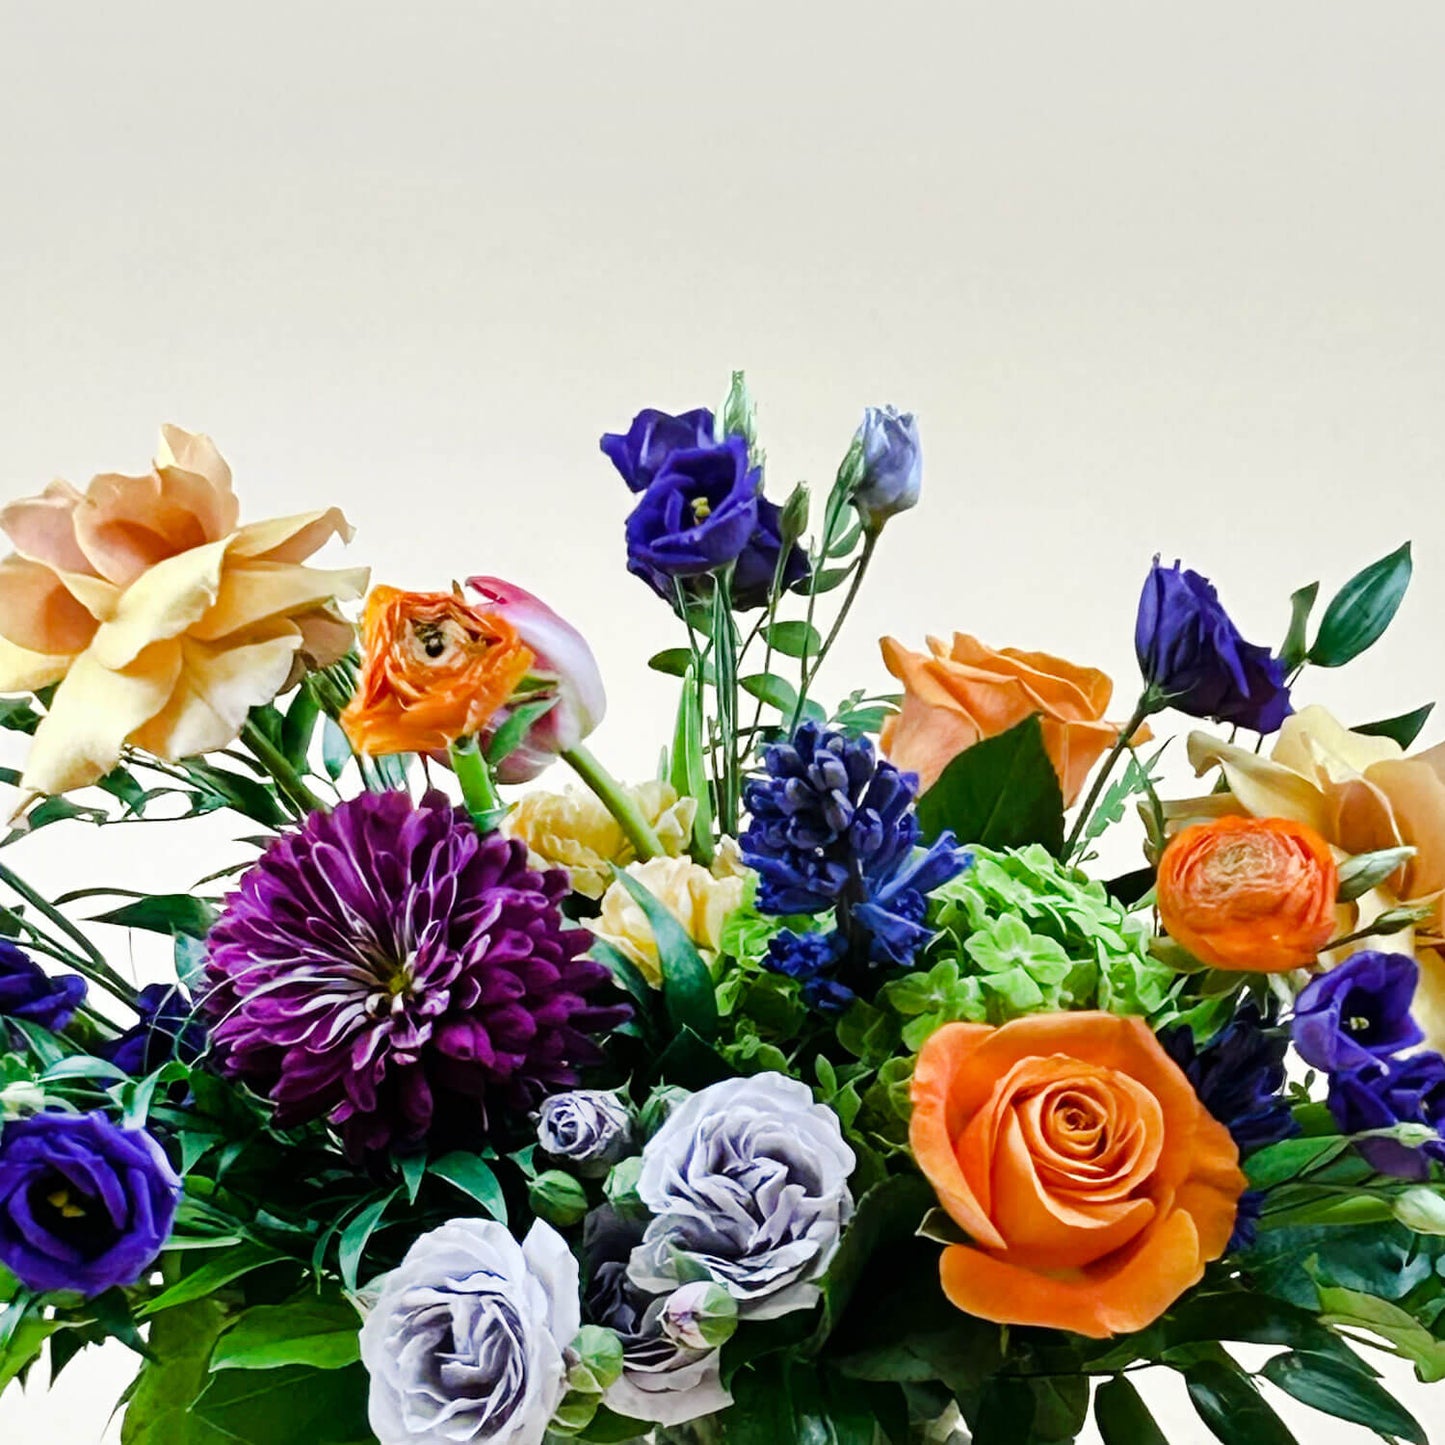 Close-up image of a dynamic bouquet featuring yellow and lavender hues transitioning into deeper purple tones, with accents of citrus orange for vibrancy. A thoughtful and romantic combination. Order online for same-day flower delivery from Toronto's best florist, available near you.